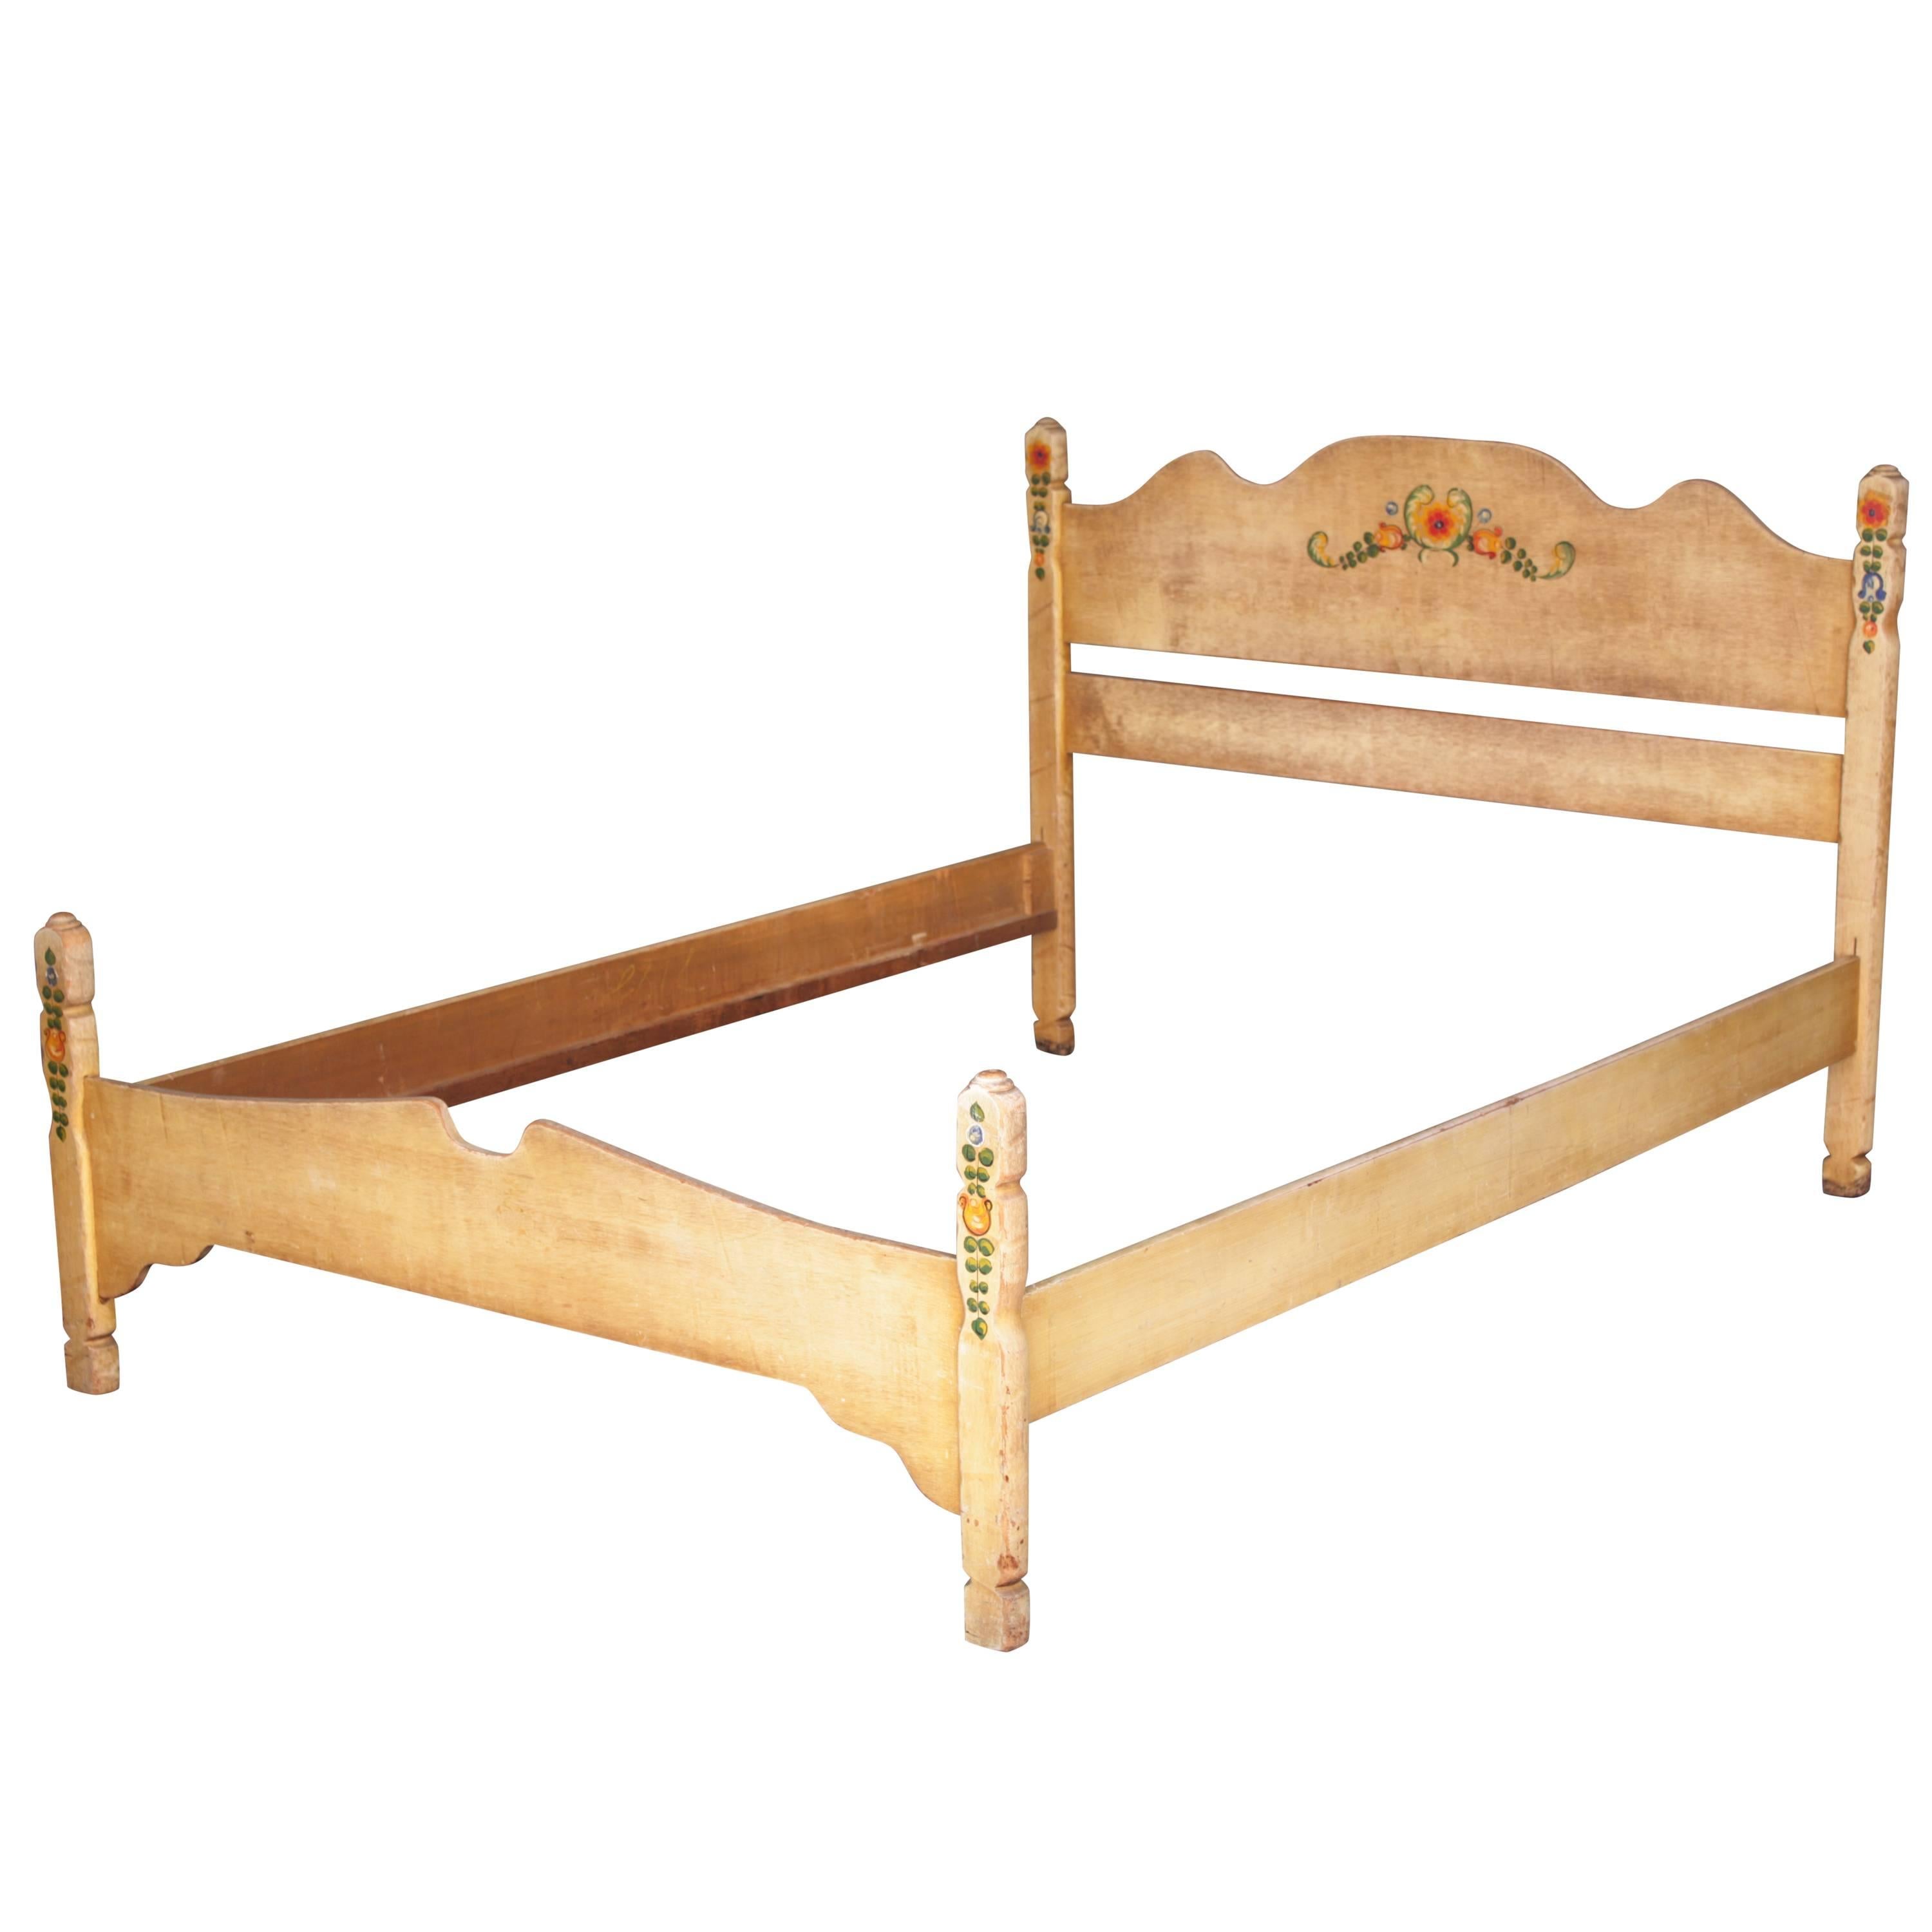 Original Signed Hand-Painted Double Monterey Bed 